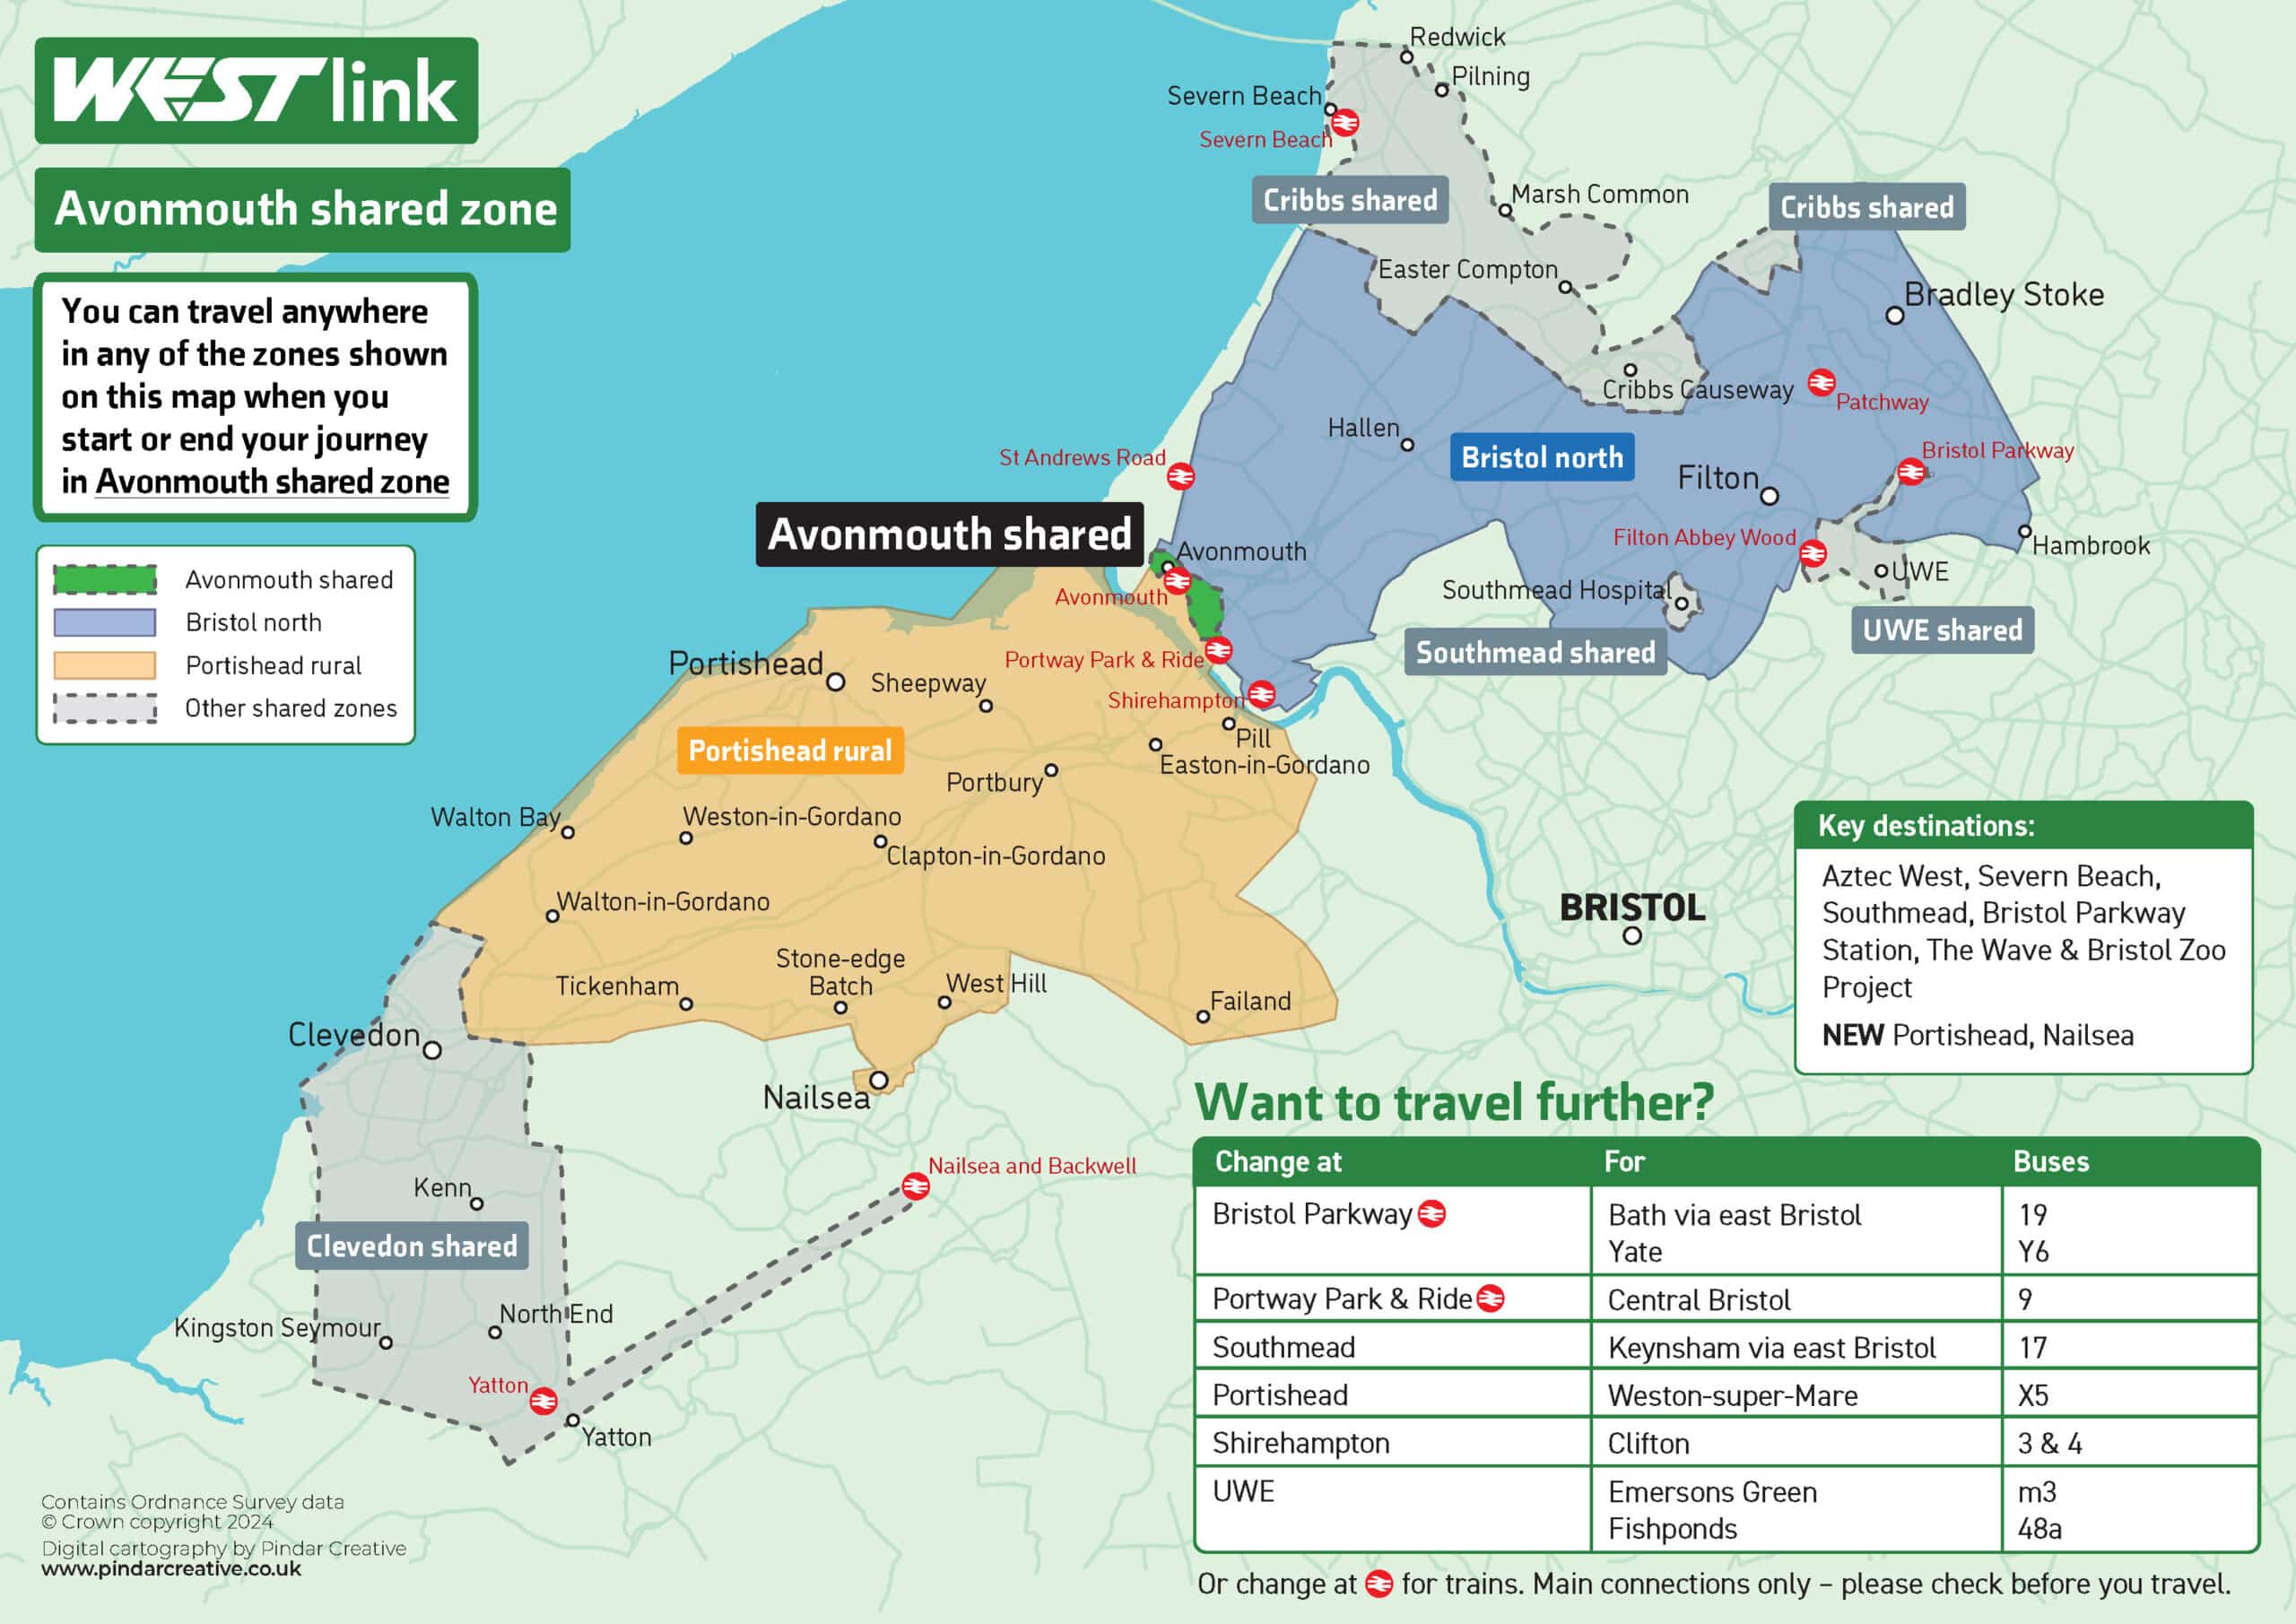 Avonmouth shared zone map showing the boundaries and where you can travel. This information is also provided in an accessible version below.